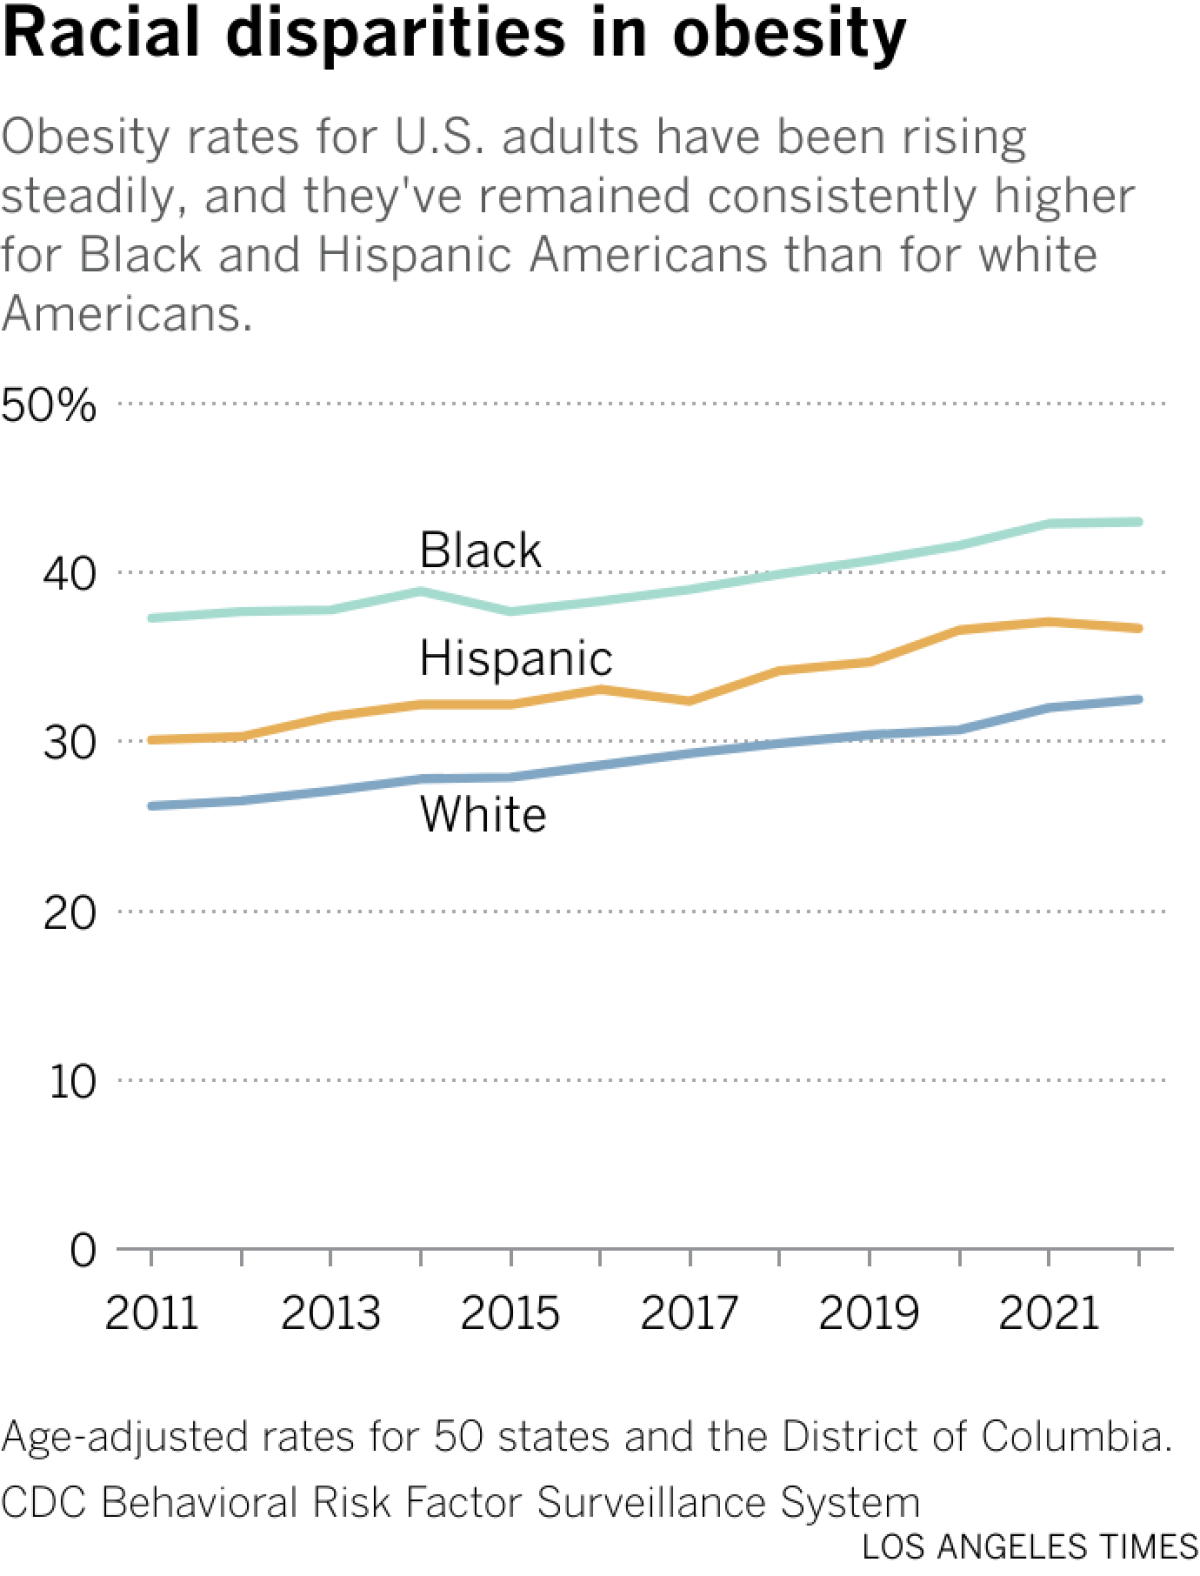 Obesity rates among U.S. adults have been steadily increasing, and obesity rates among black and Hispanic Americans remain consistently higher than among white Americans.